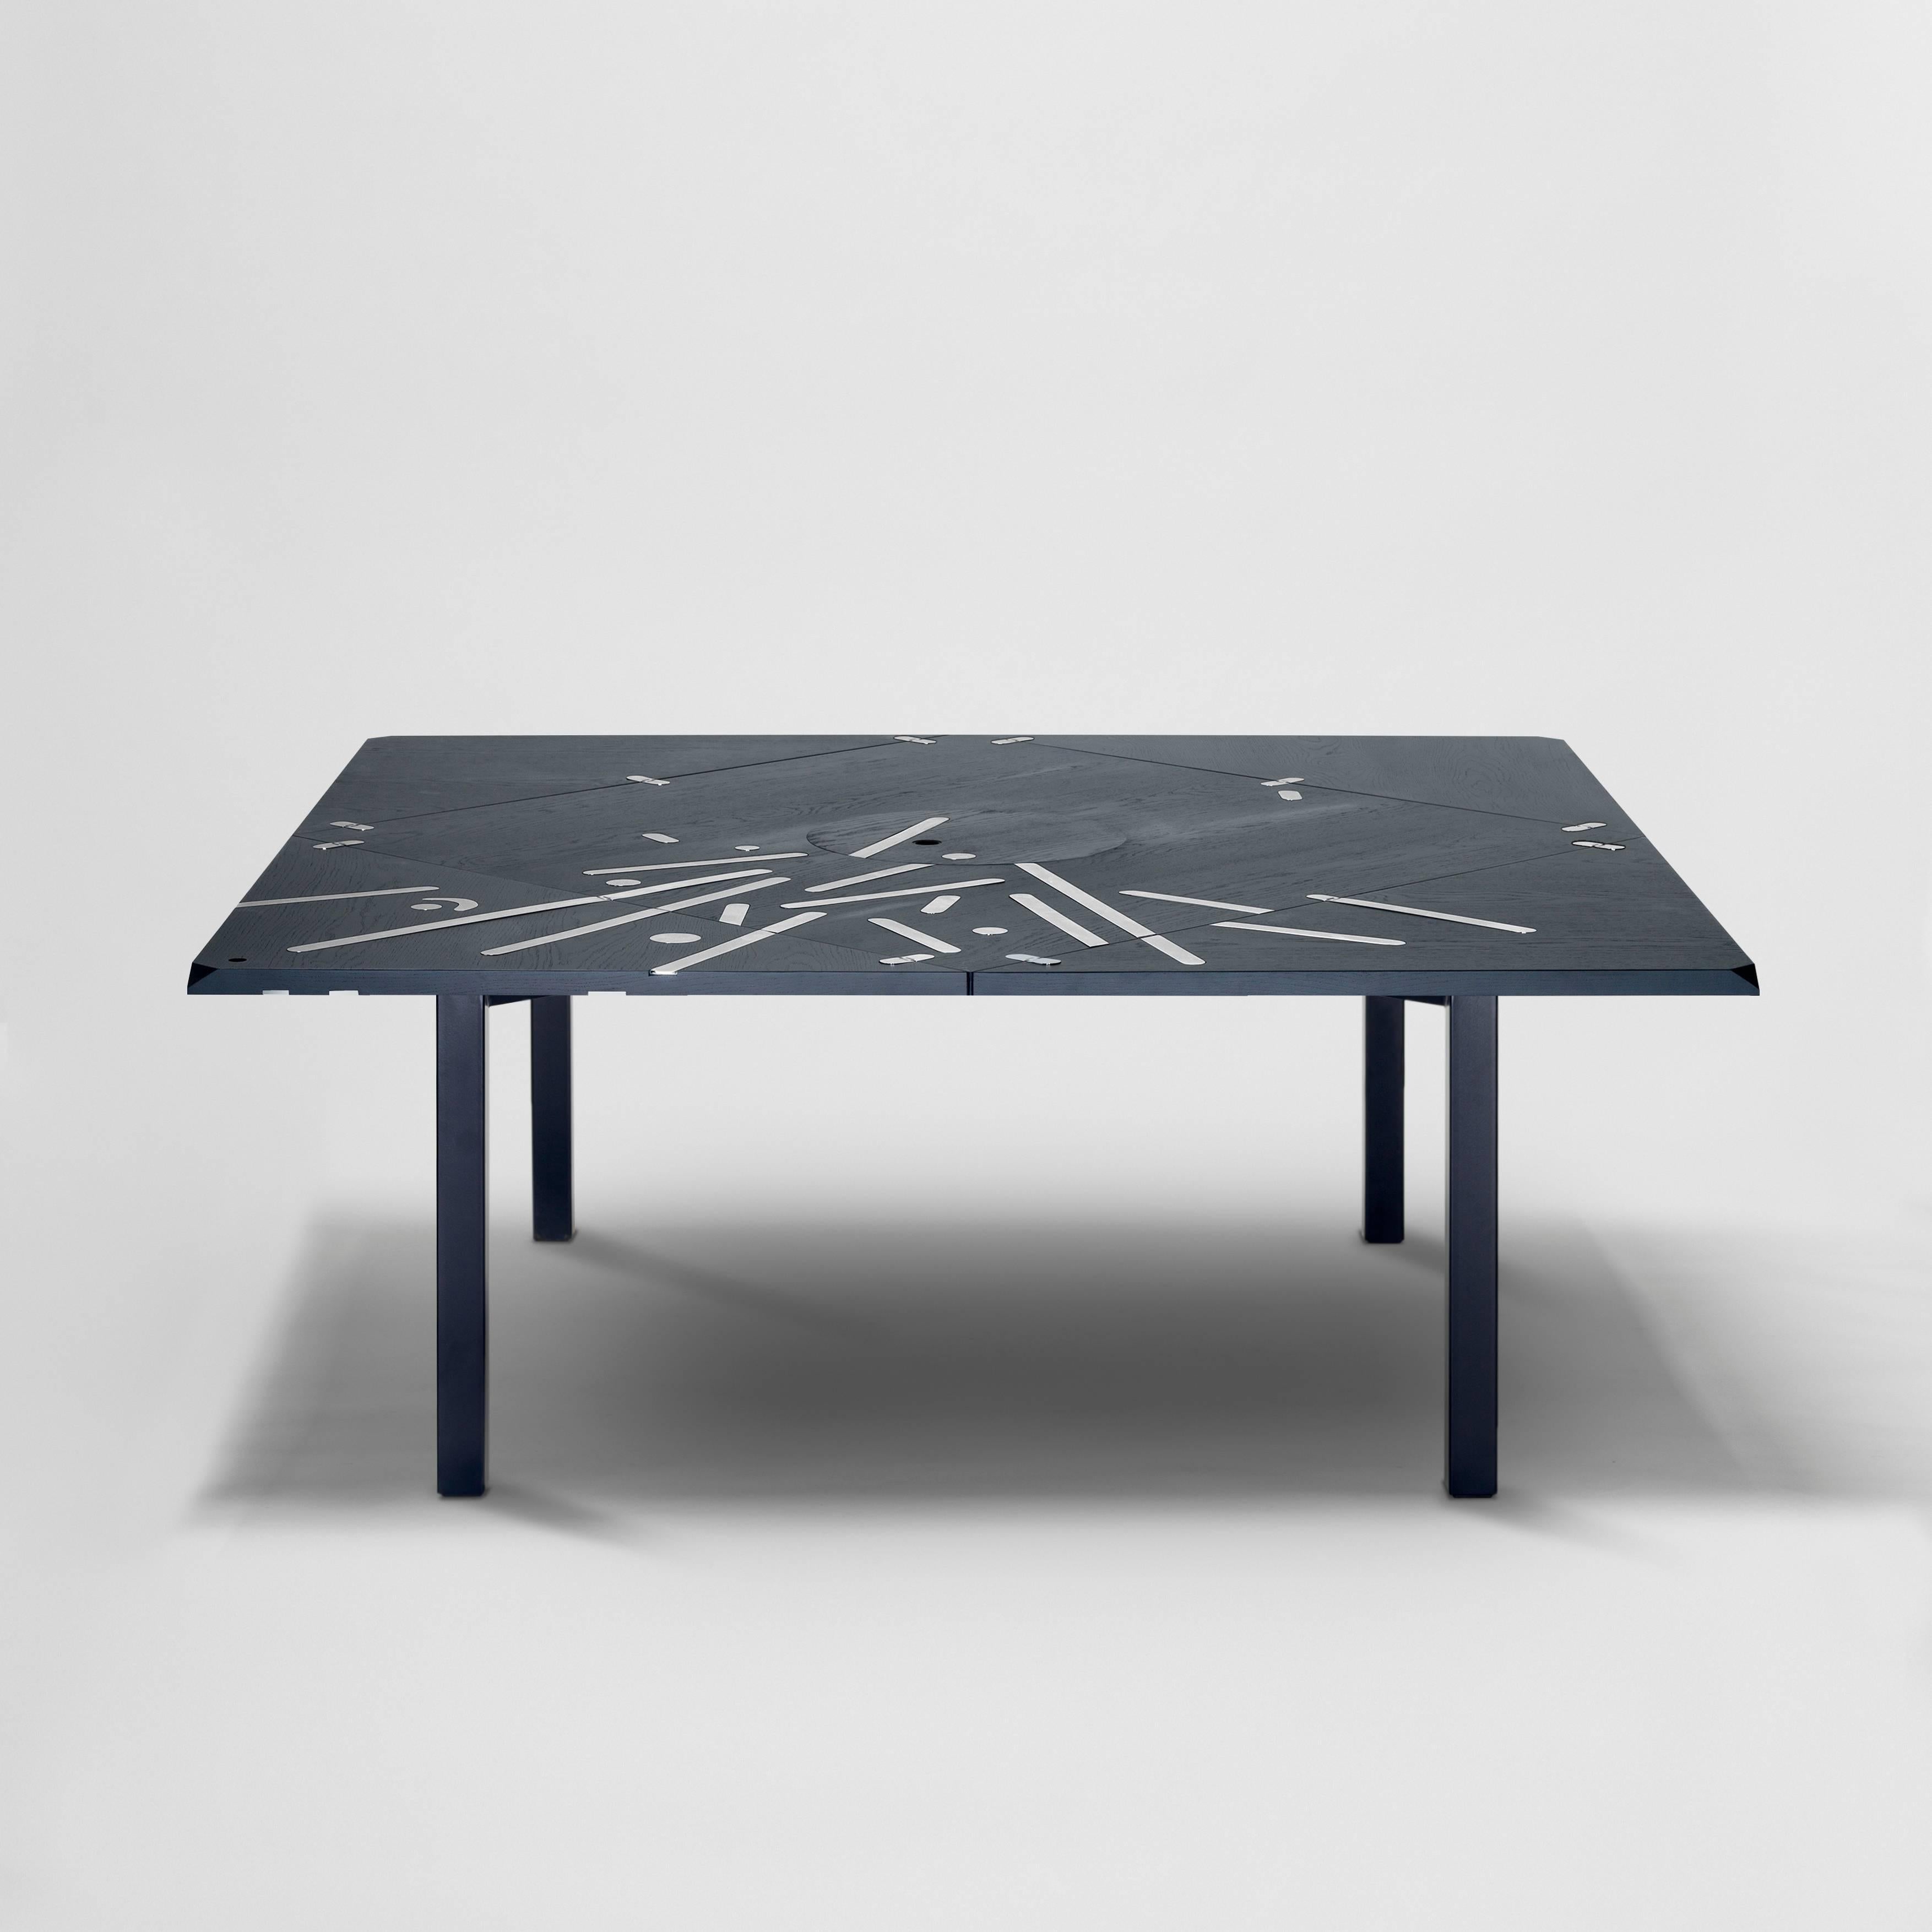 Limited Edition Alella Table by Lluis Clotet In New Condition For Sale In Barcelona, Barcelona